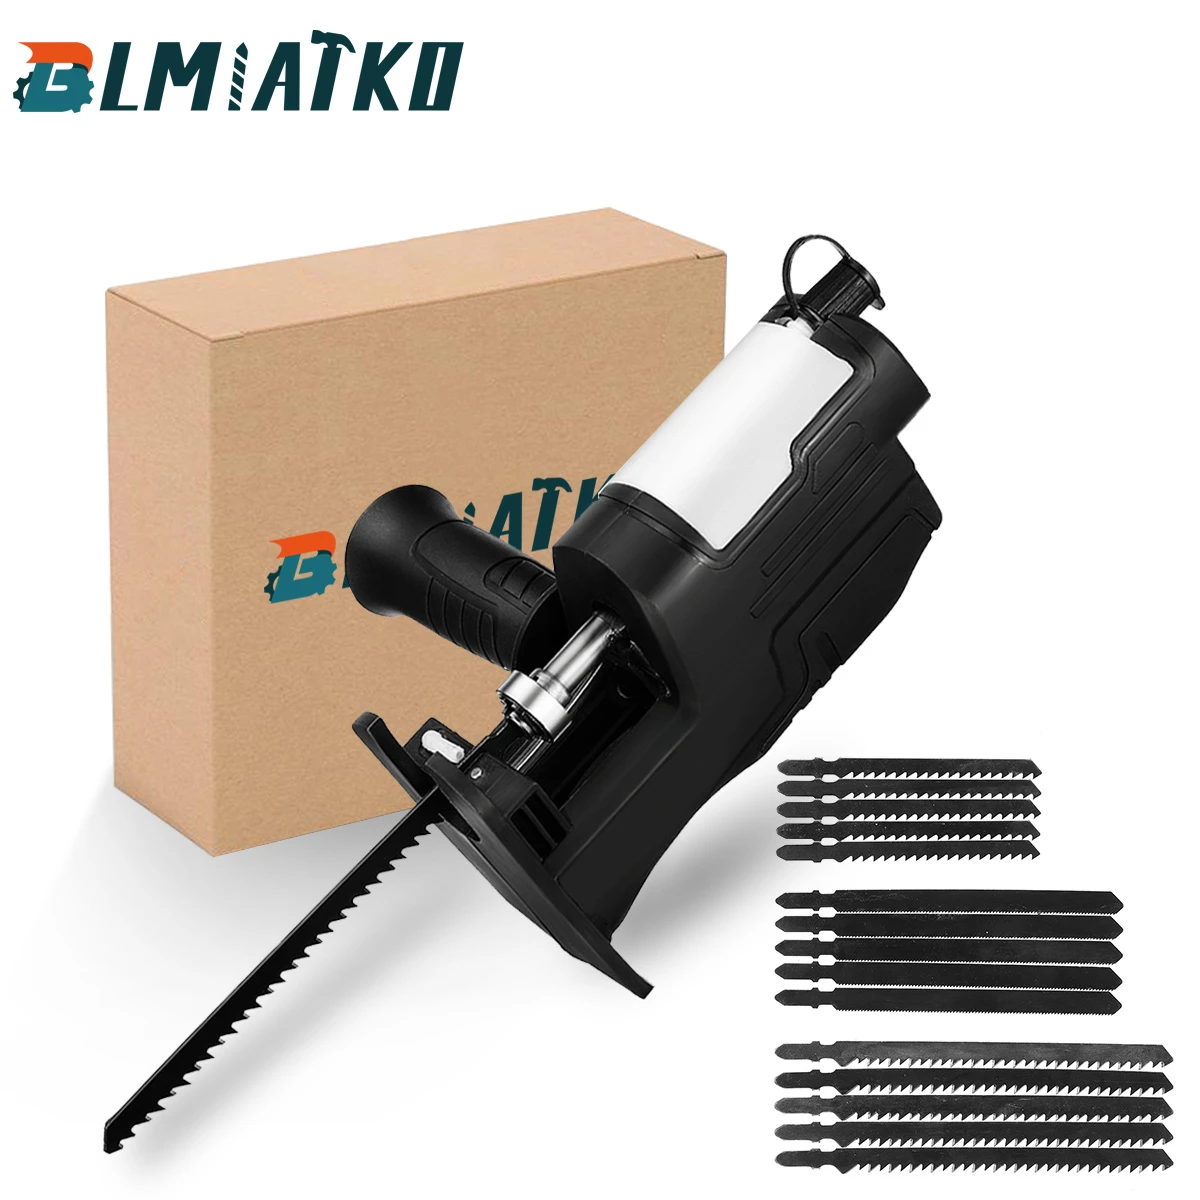 BLMIATKO Reciprocating Saw Power Tool Reciprocating Saw Metal Cutting Wood Cutting Tool Electric Drill Attachment With Blades